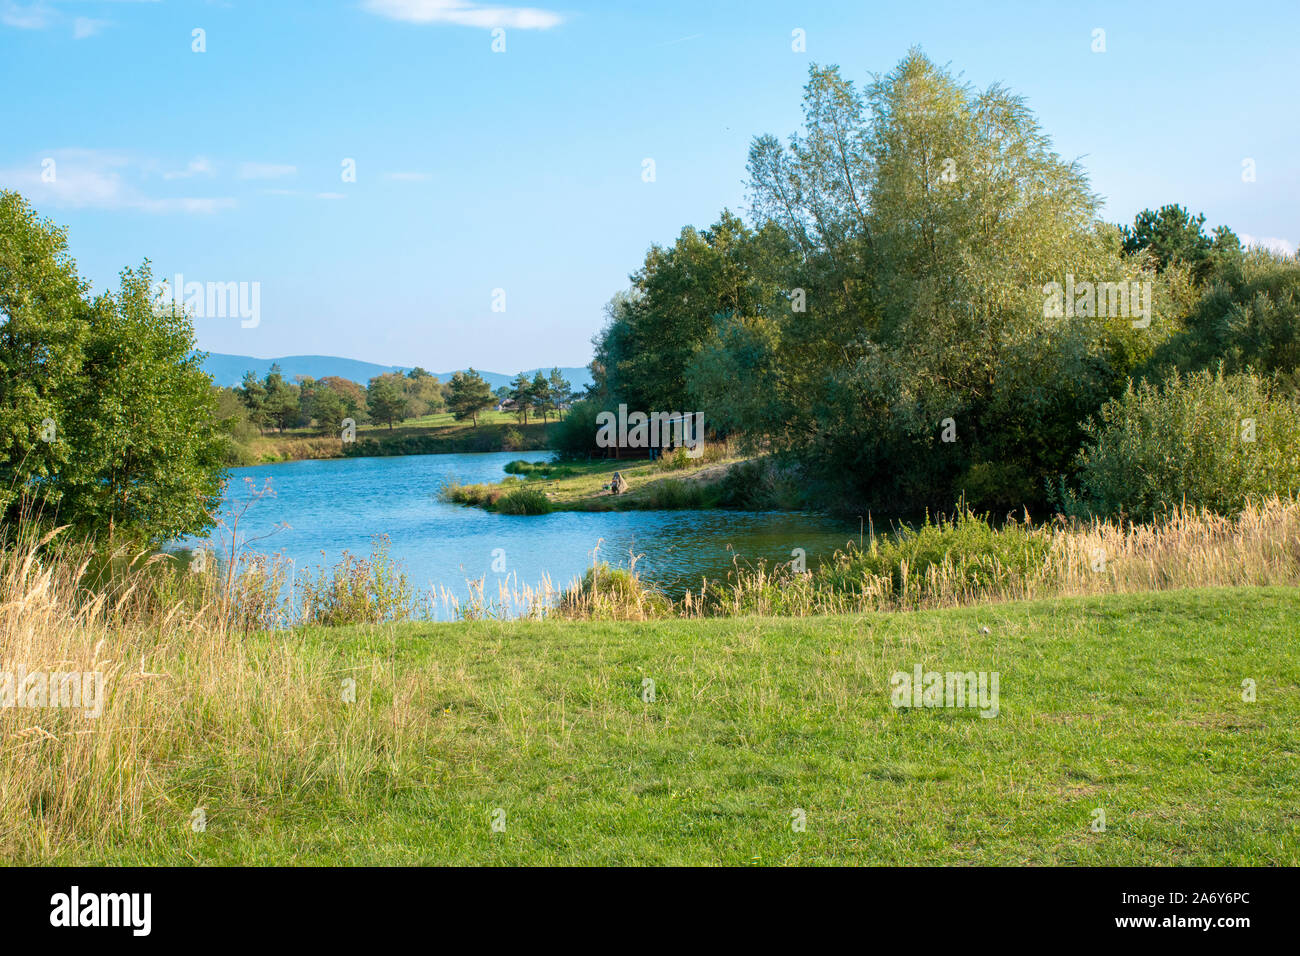 Slovak Nature High Resolution Stock Photography and Images - Alamy